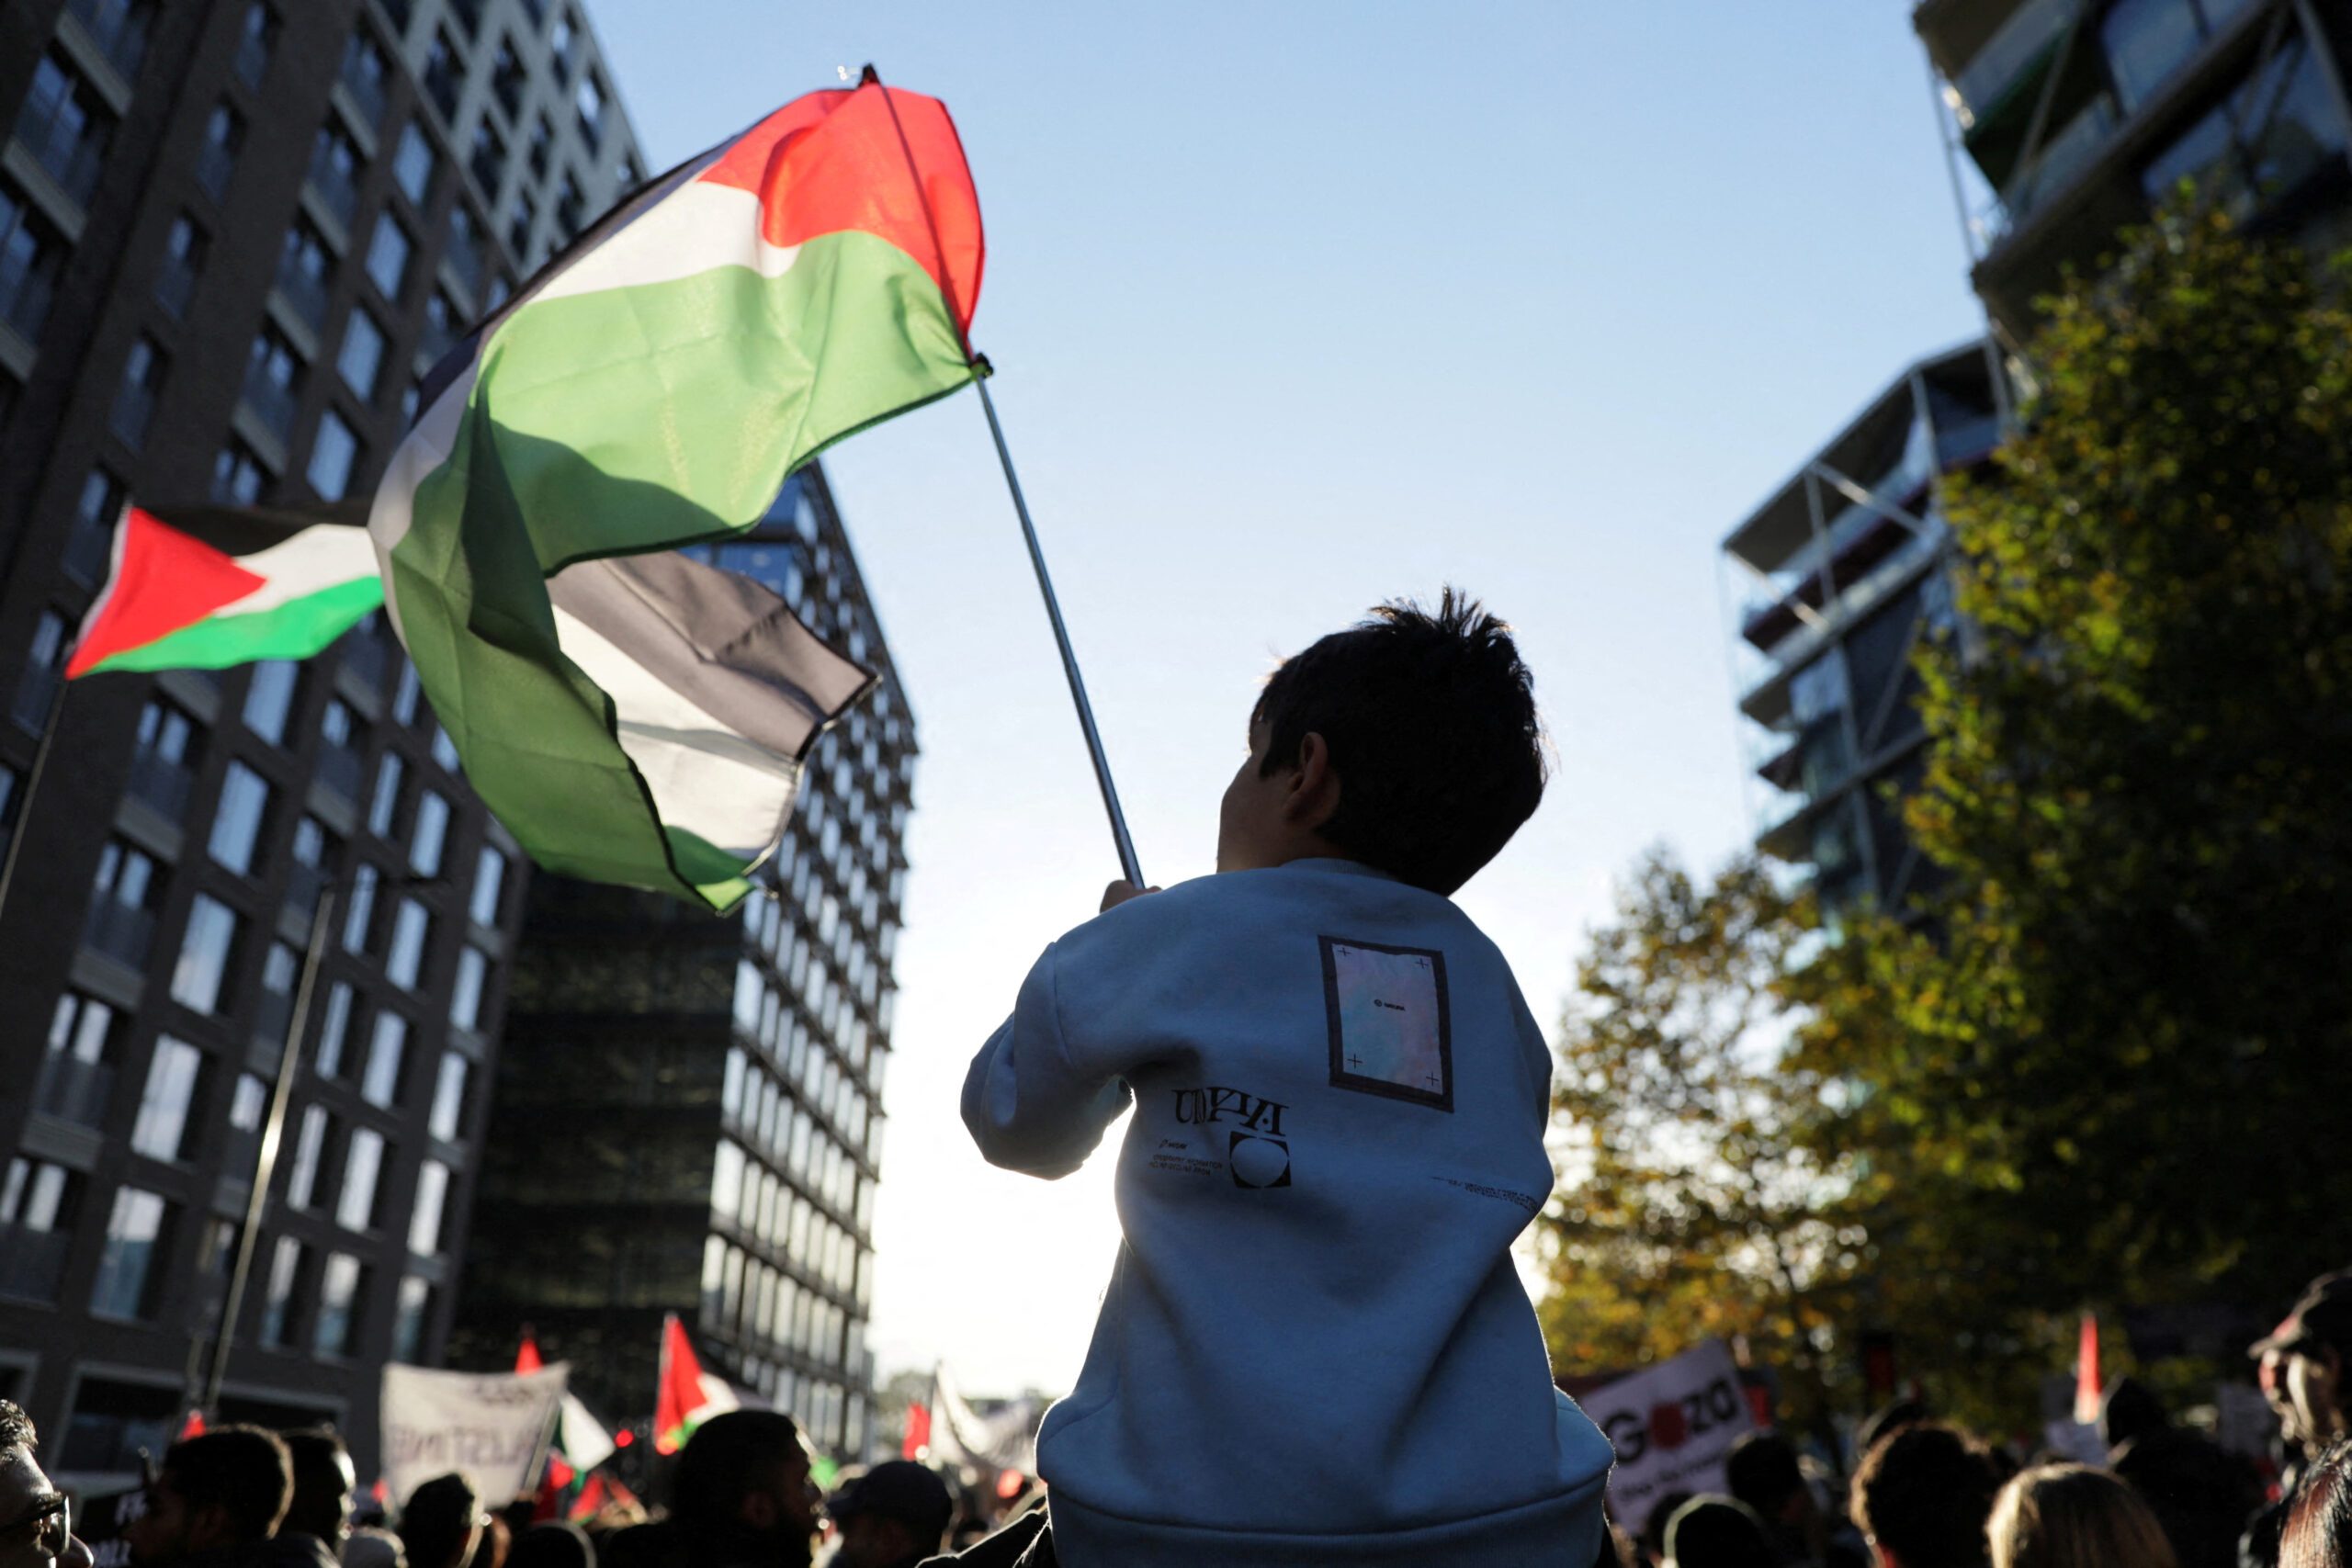 London police arrest over 120 as pro-Palestinian rally draws counter-protests